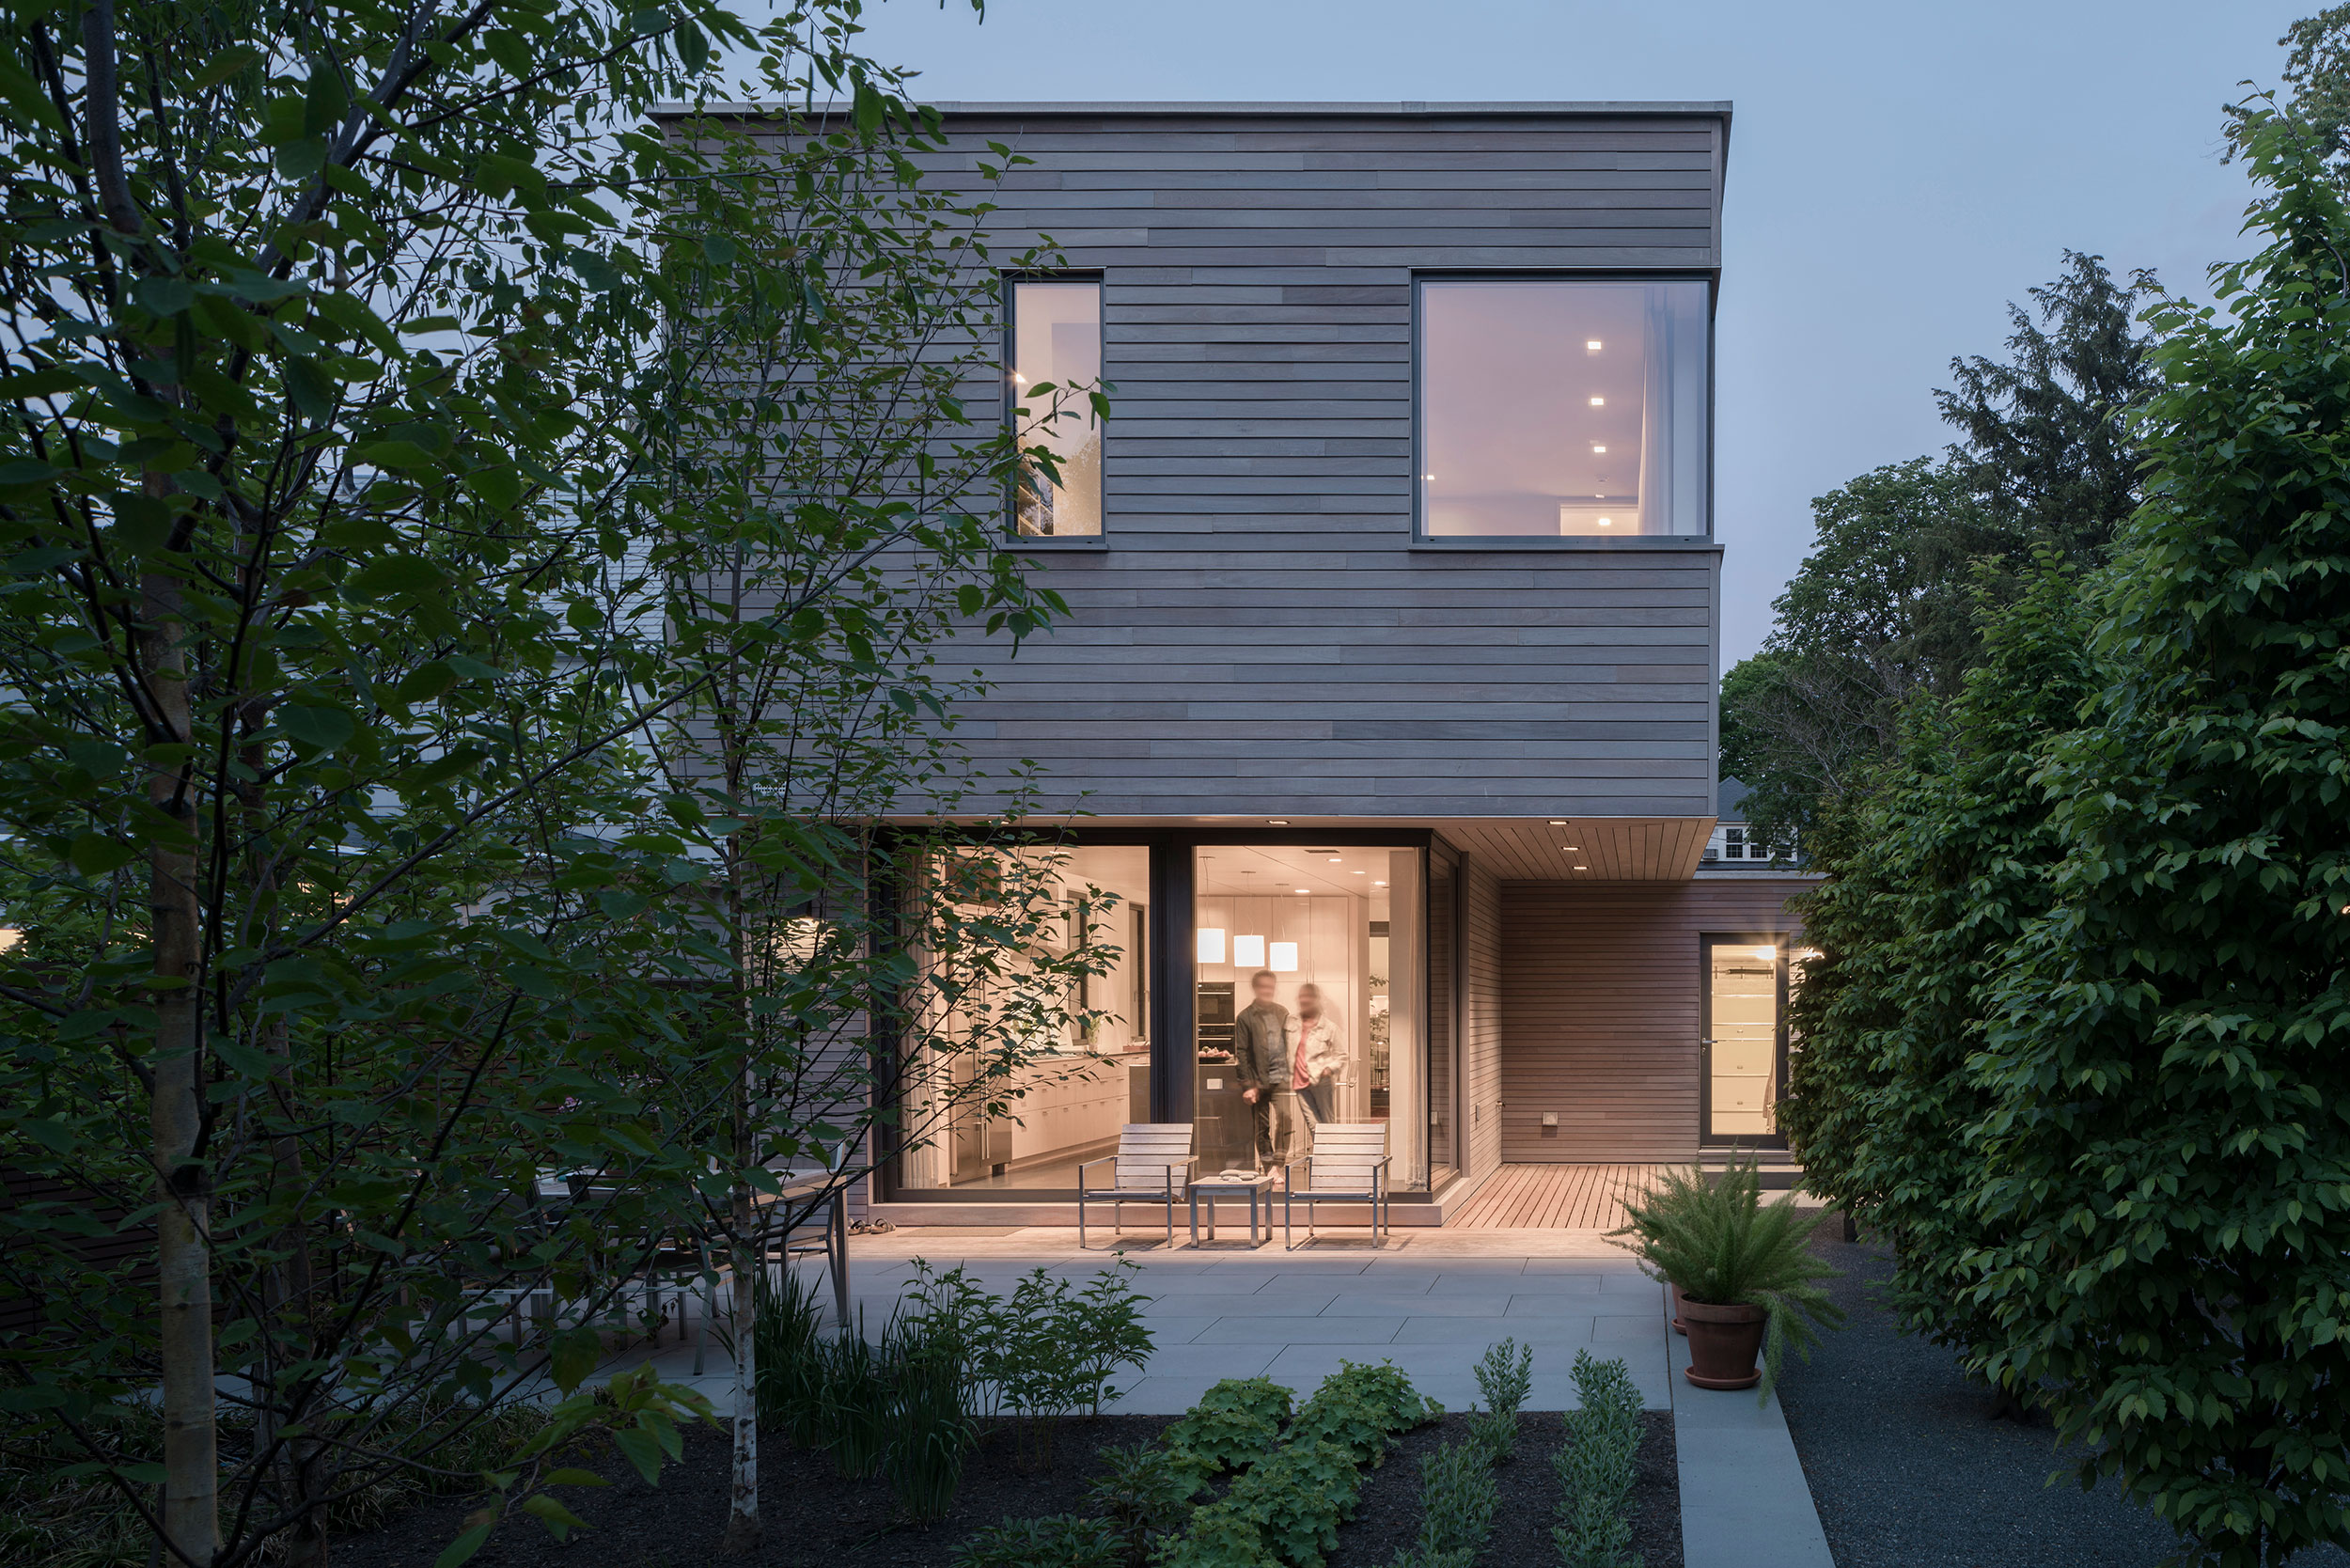 Courtyard House by Anmahian Winton Architects, in Cambridge, MA. Photo: Florian Holzherr.